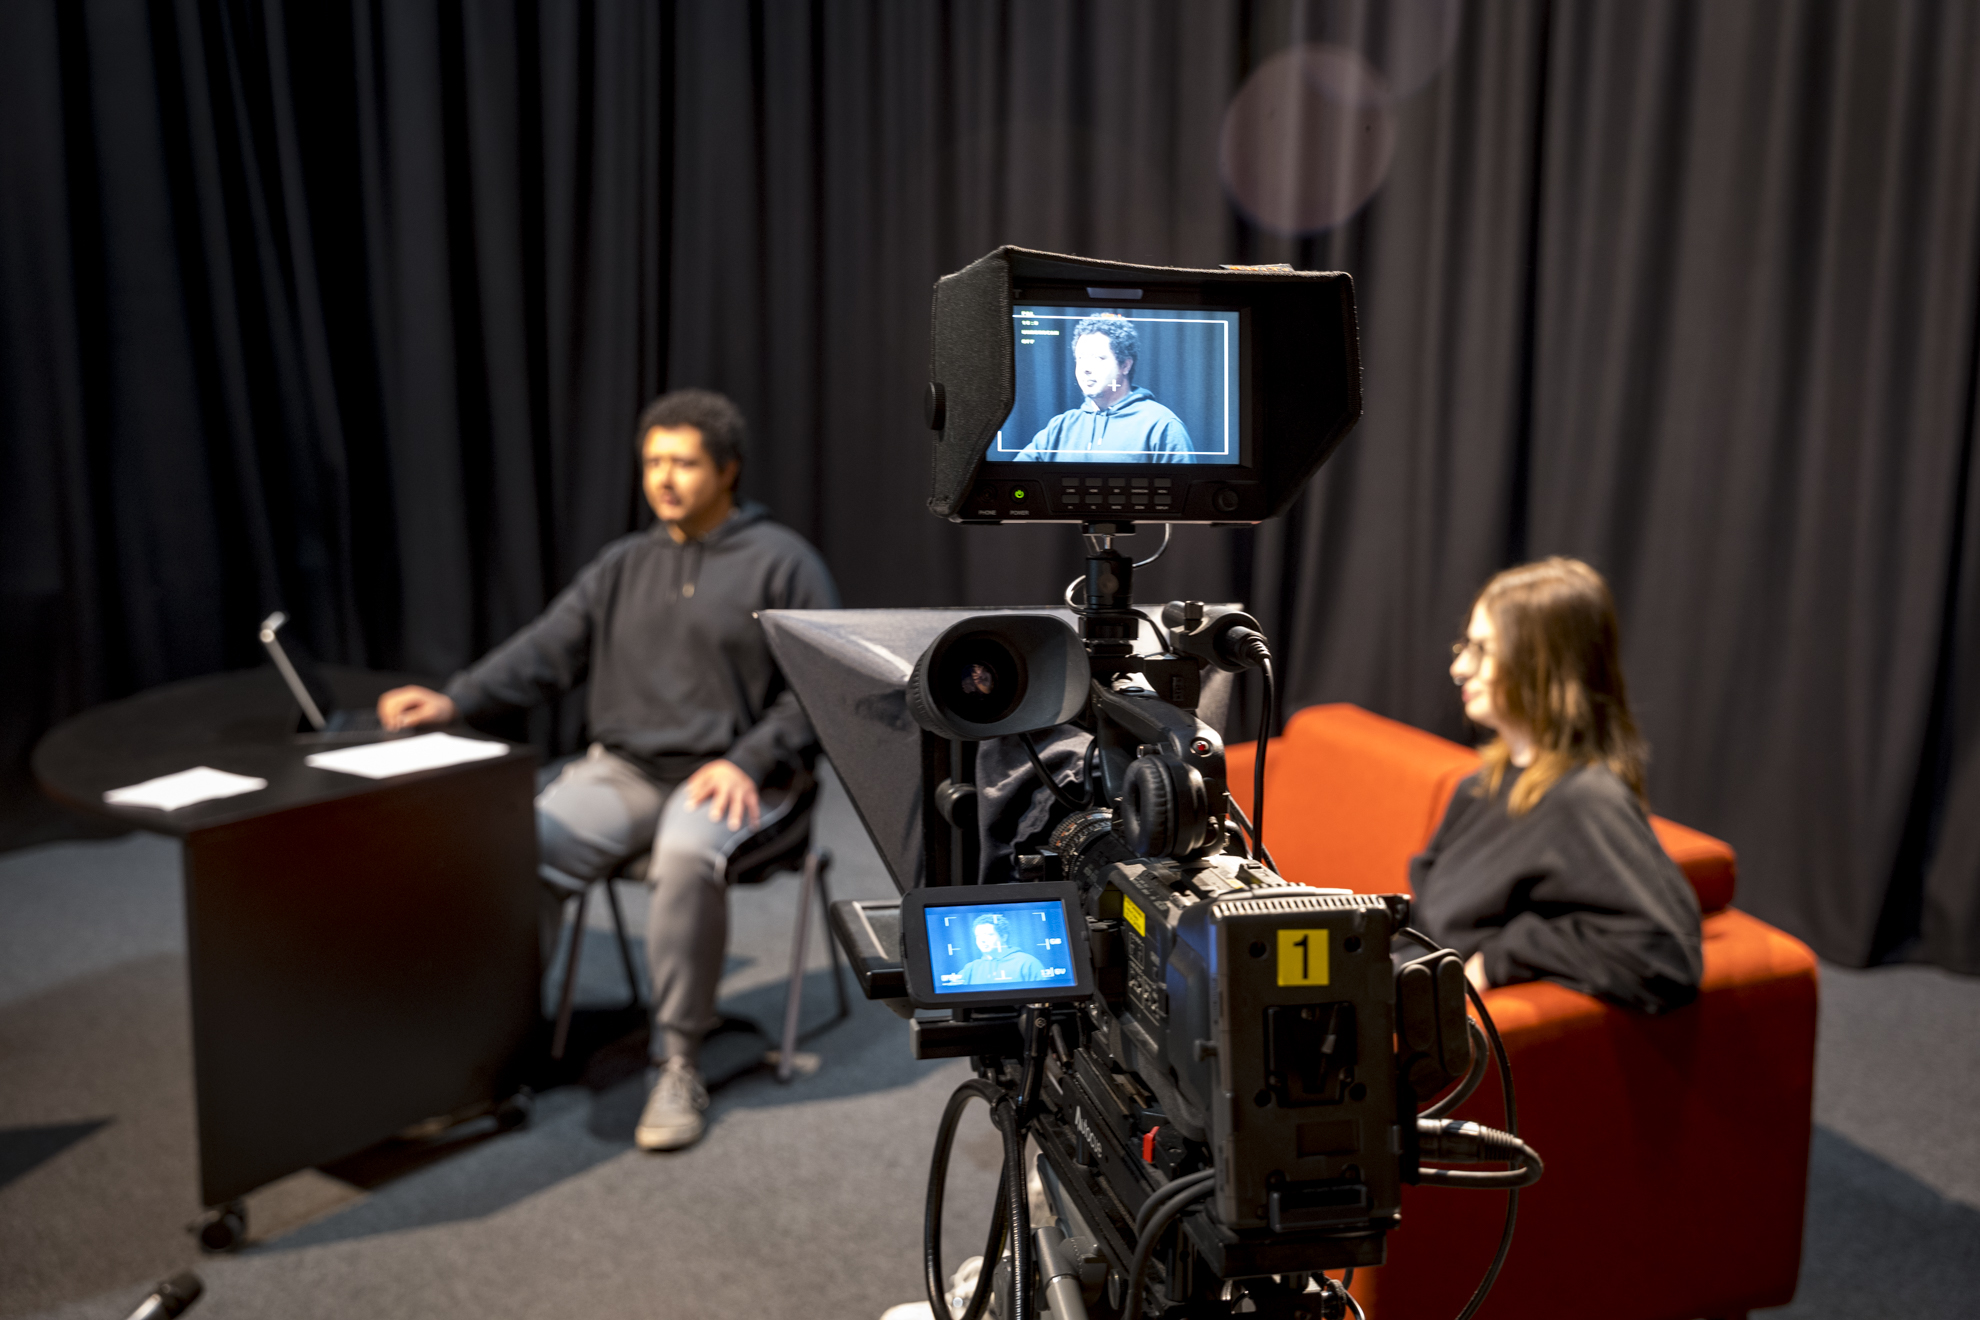 Diploma in Creative Media Production & Technology